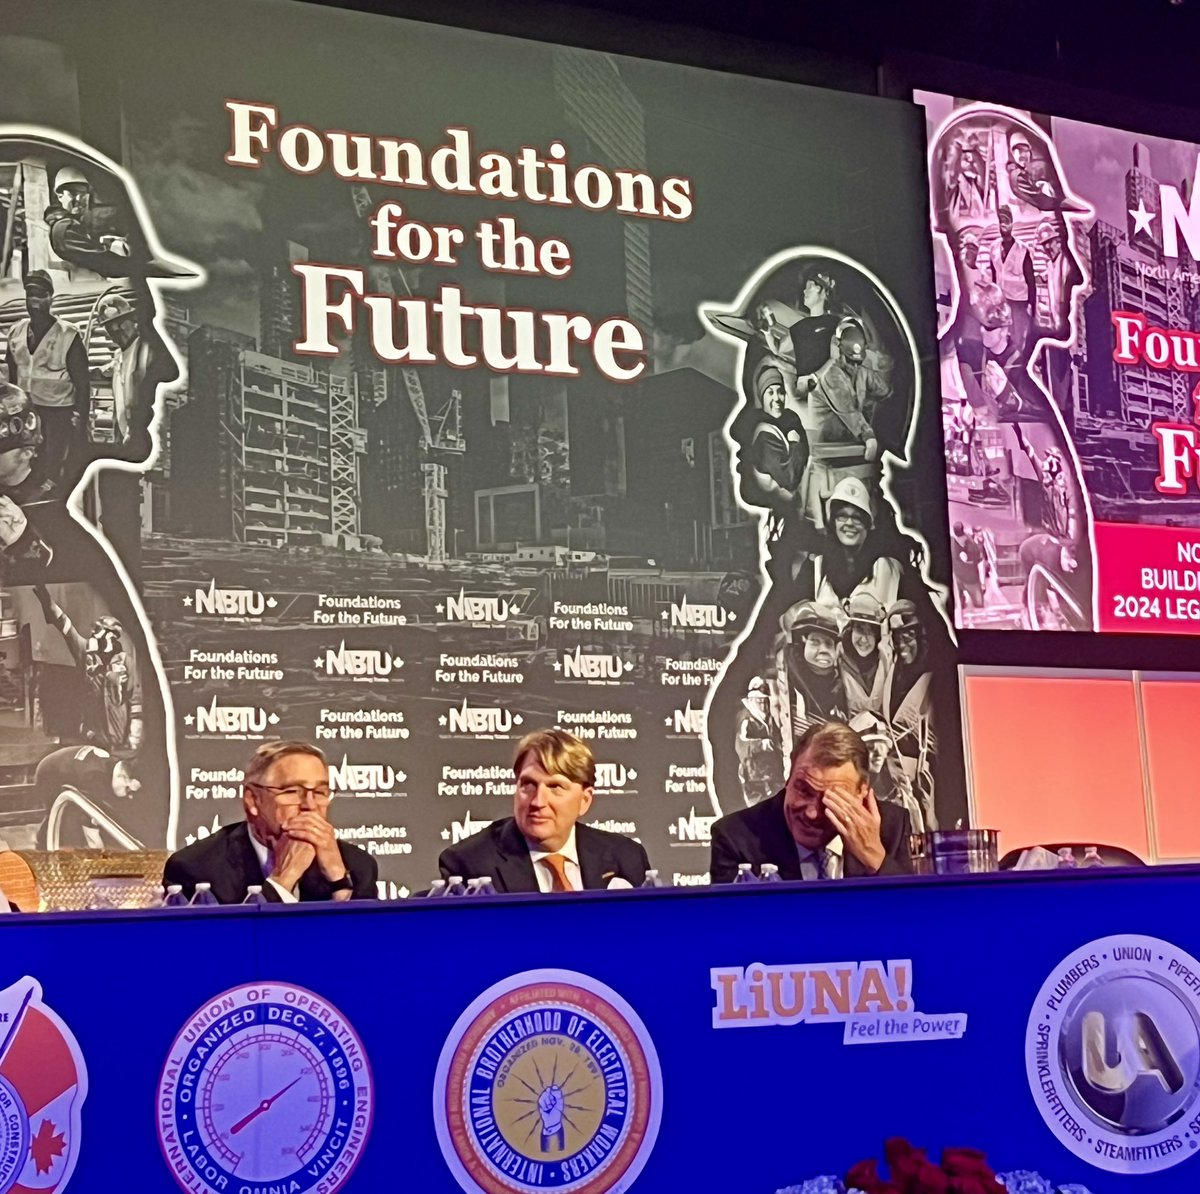 Feeling surreal at my first @NABTU Legislative Conference as President of @LIUNA. Grateful for the opportunity to represent our members and excited for the discussions ahead! #NABTU2024 #FeelThePower